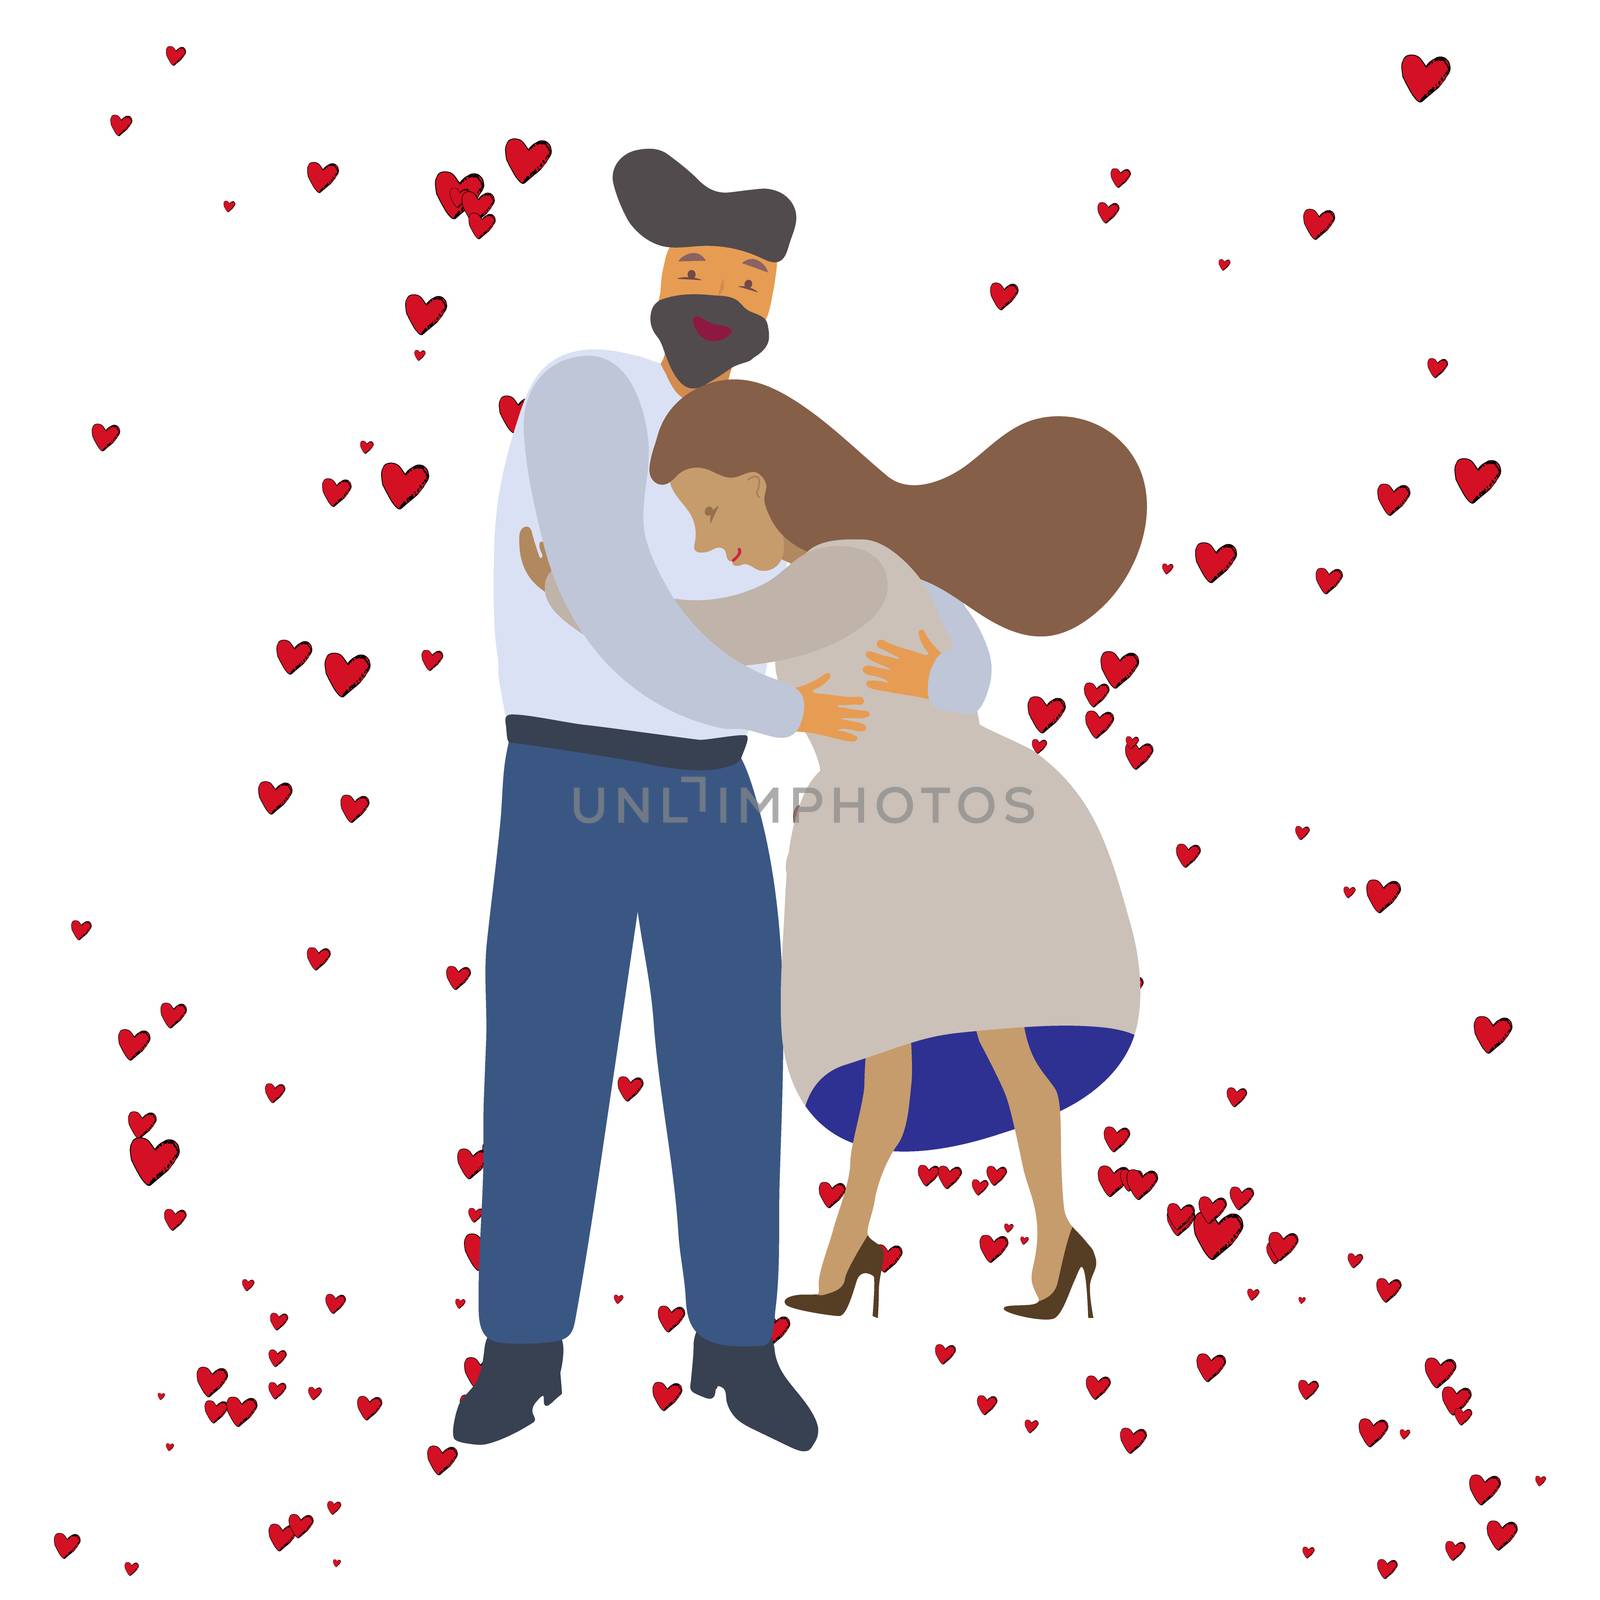 Woman hugging man with red hearts. Vector illustration on white background. 